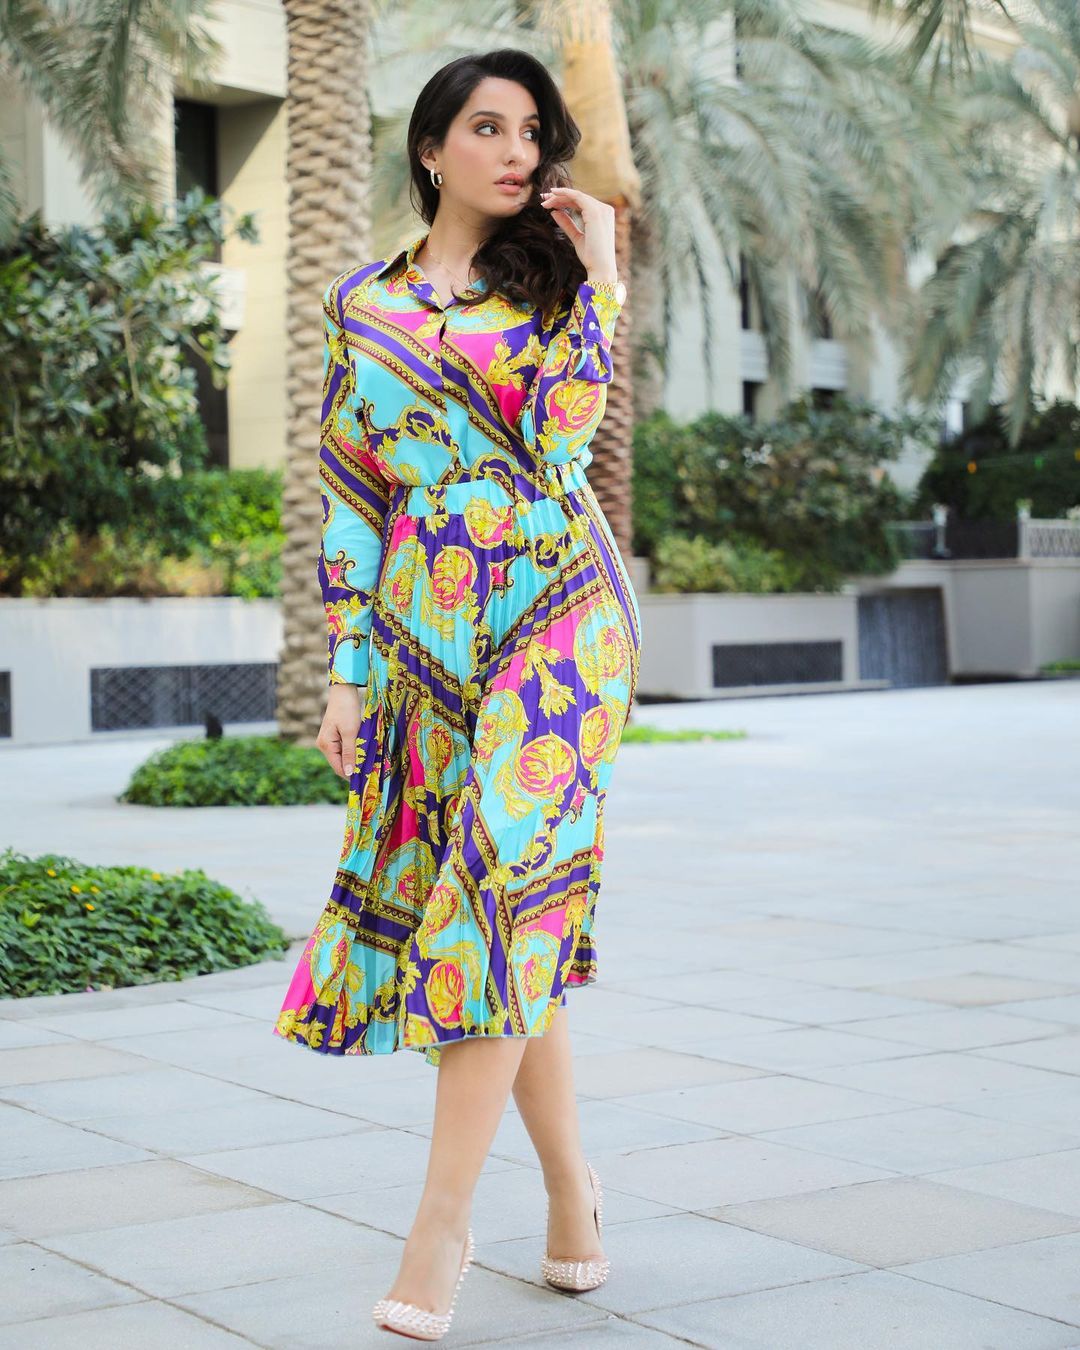 Nora Fatehi is a striking sight in the colourful pleated outfit